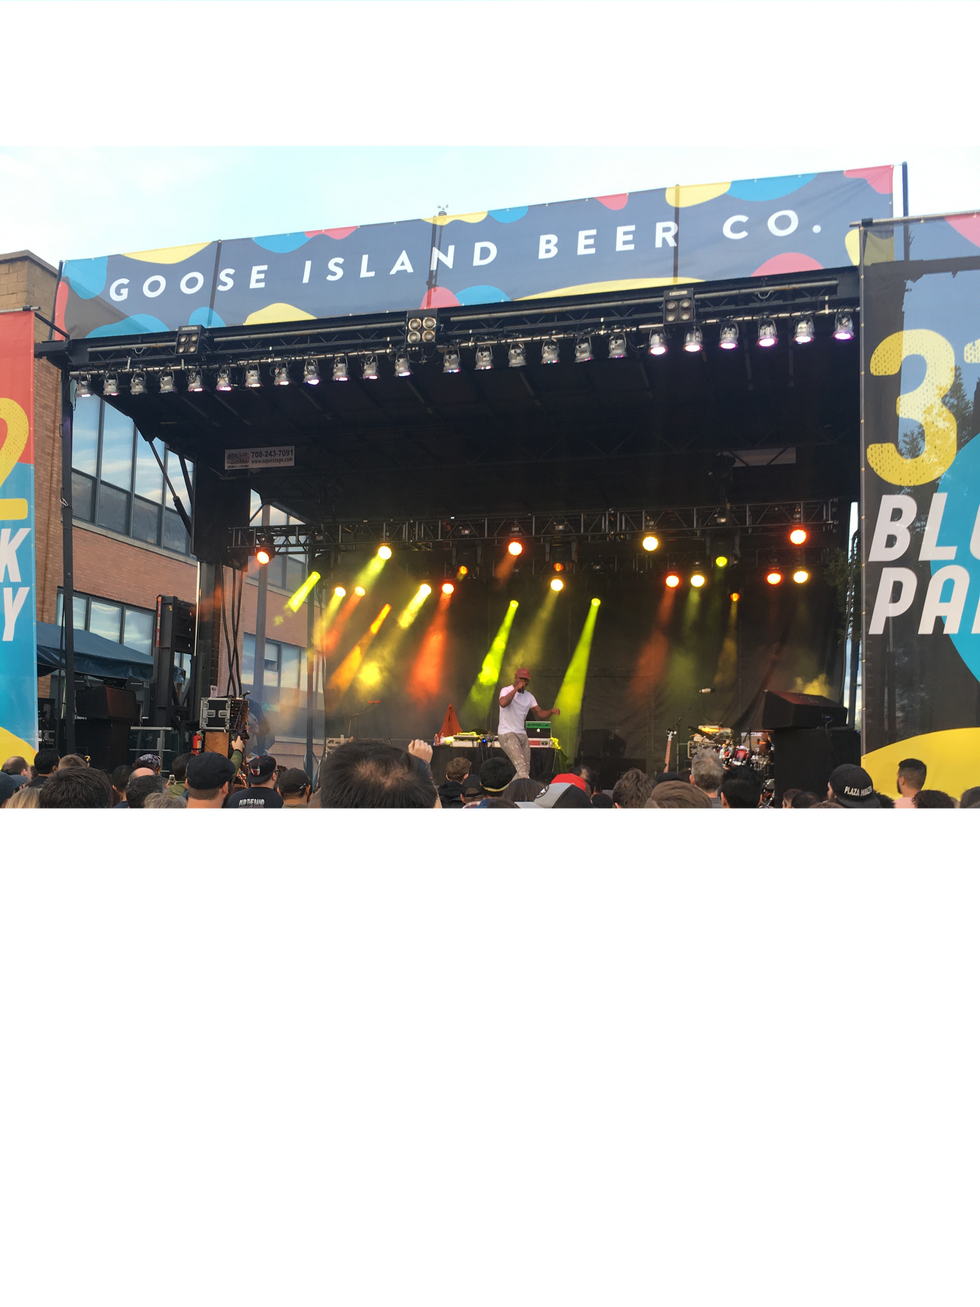 No Geese, But Plenty of Beer At Goose Island's Block Party